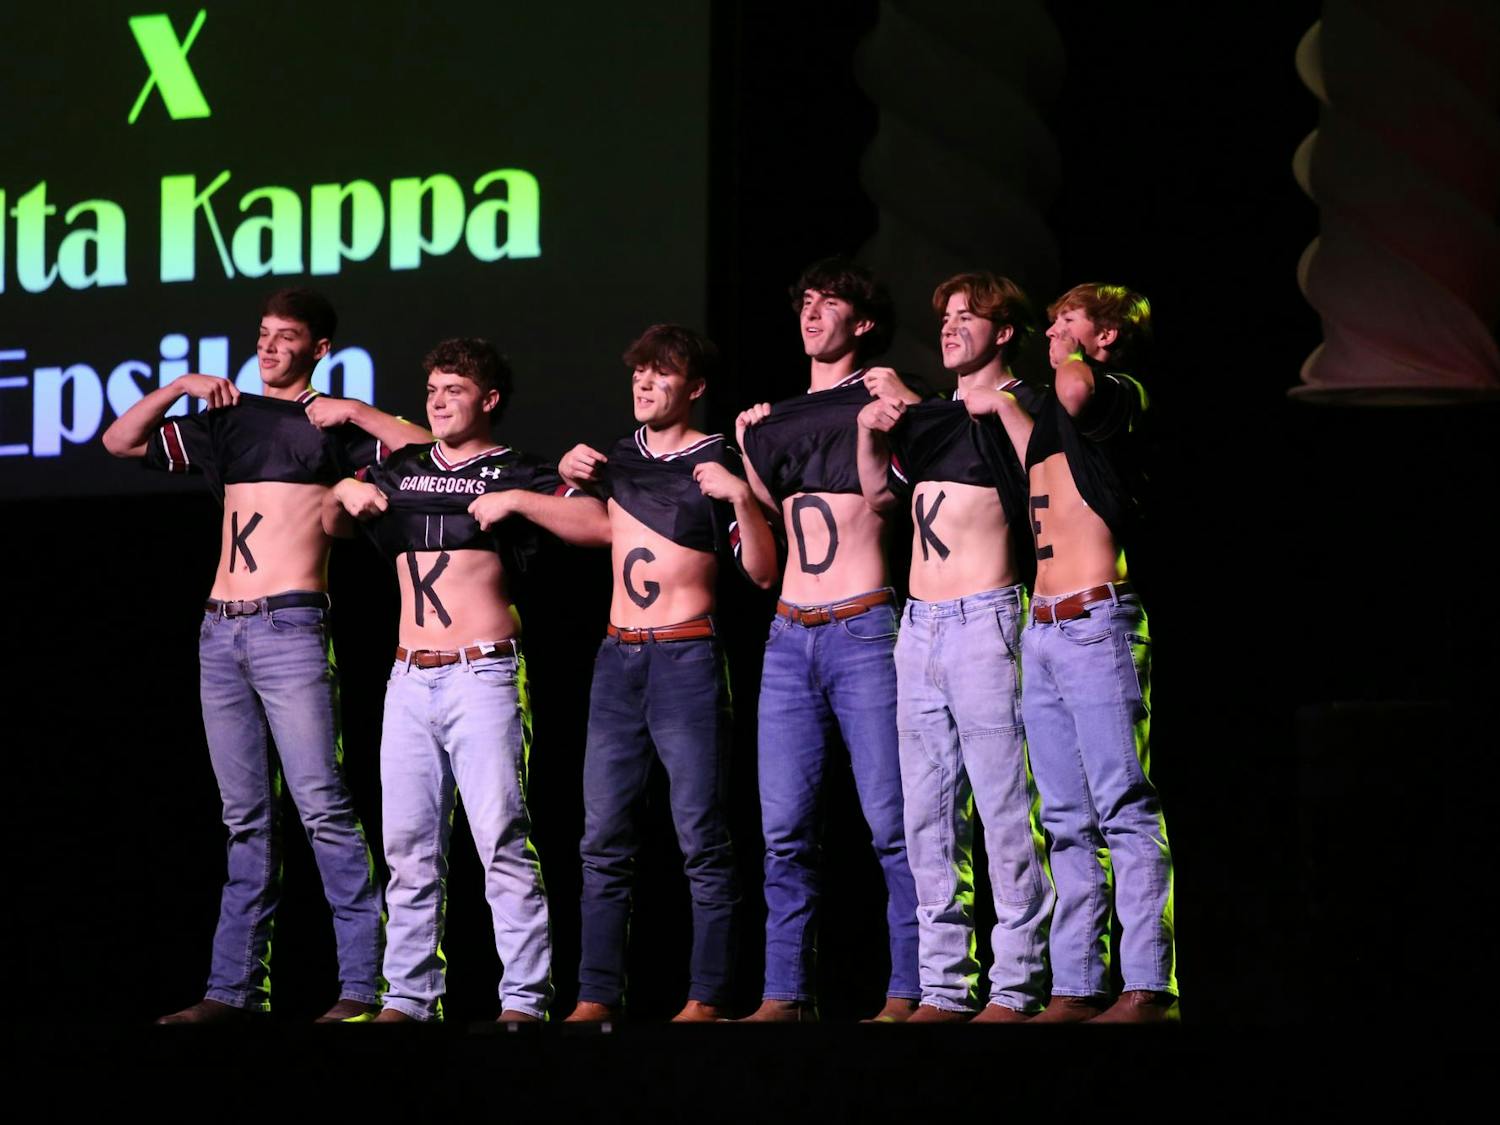 Brothers of Delta Kappa Epsilon perform at Spurs and Struts with the letters of Kappa Kappa Gamma spelled out on their chests under football jerseys. Delta Kappa Epsilon partnered with Kappa Kappa Gamma for its performance in Spurs and Struts.